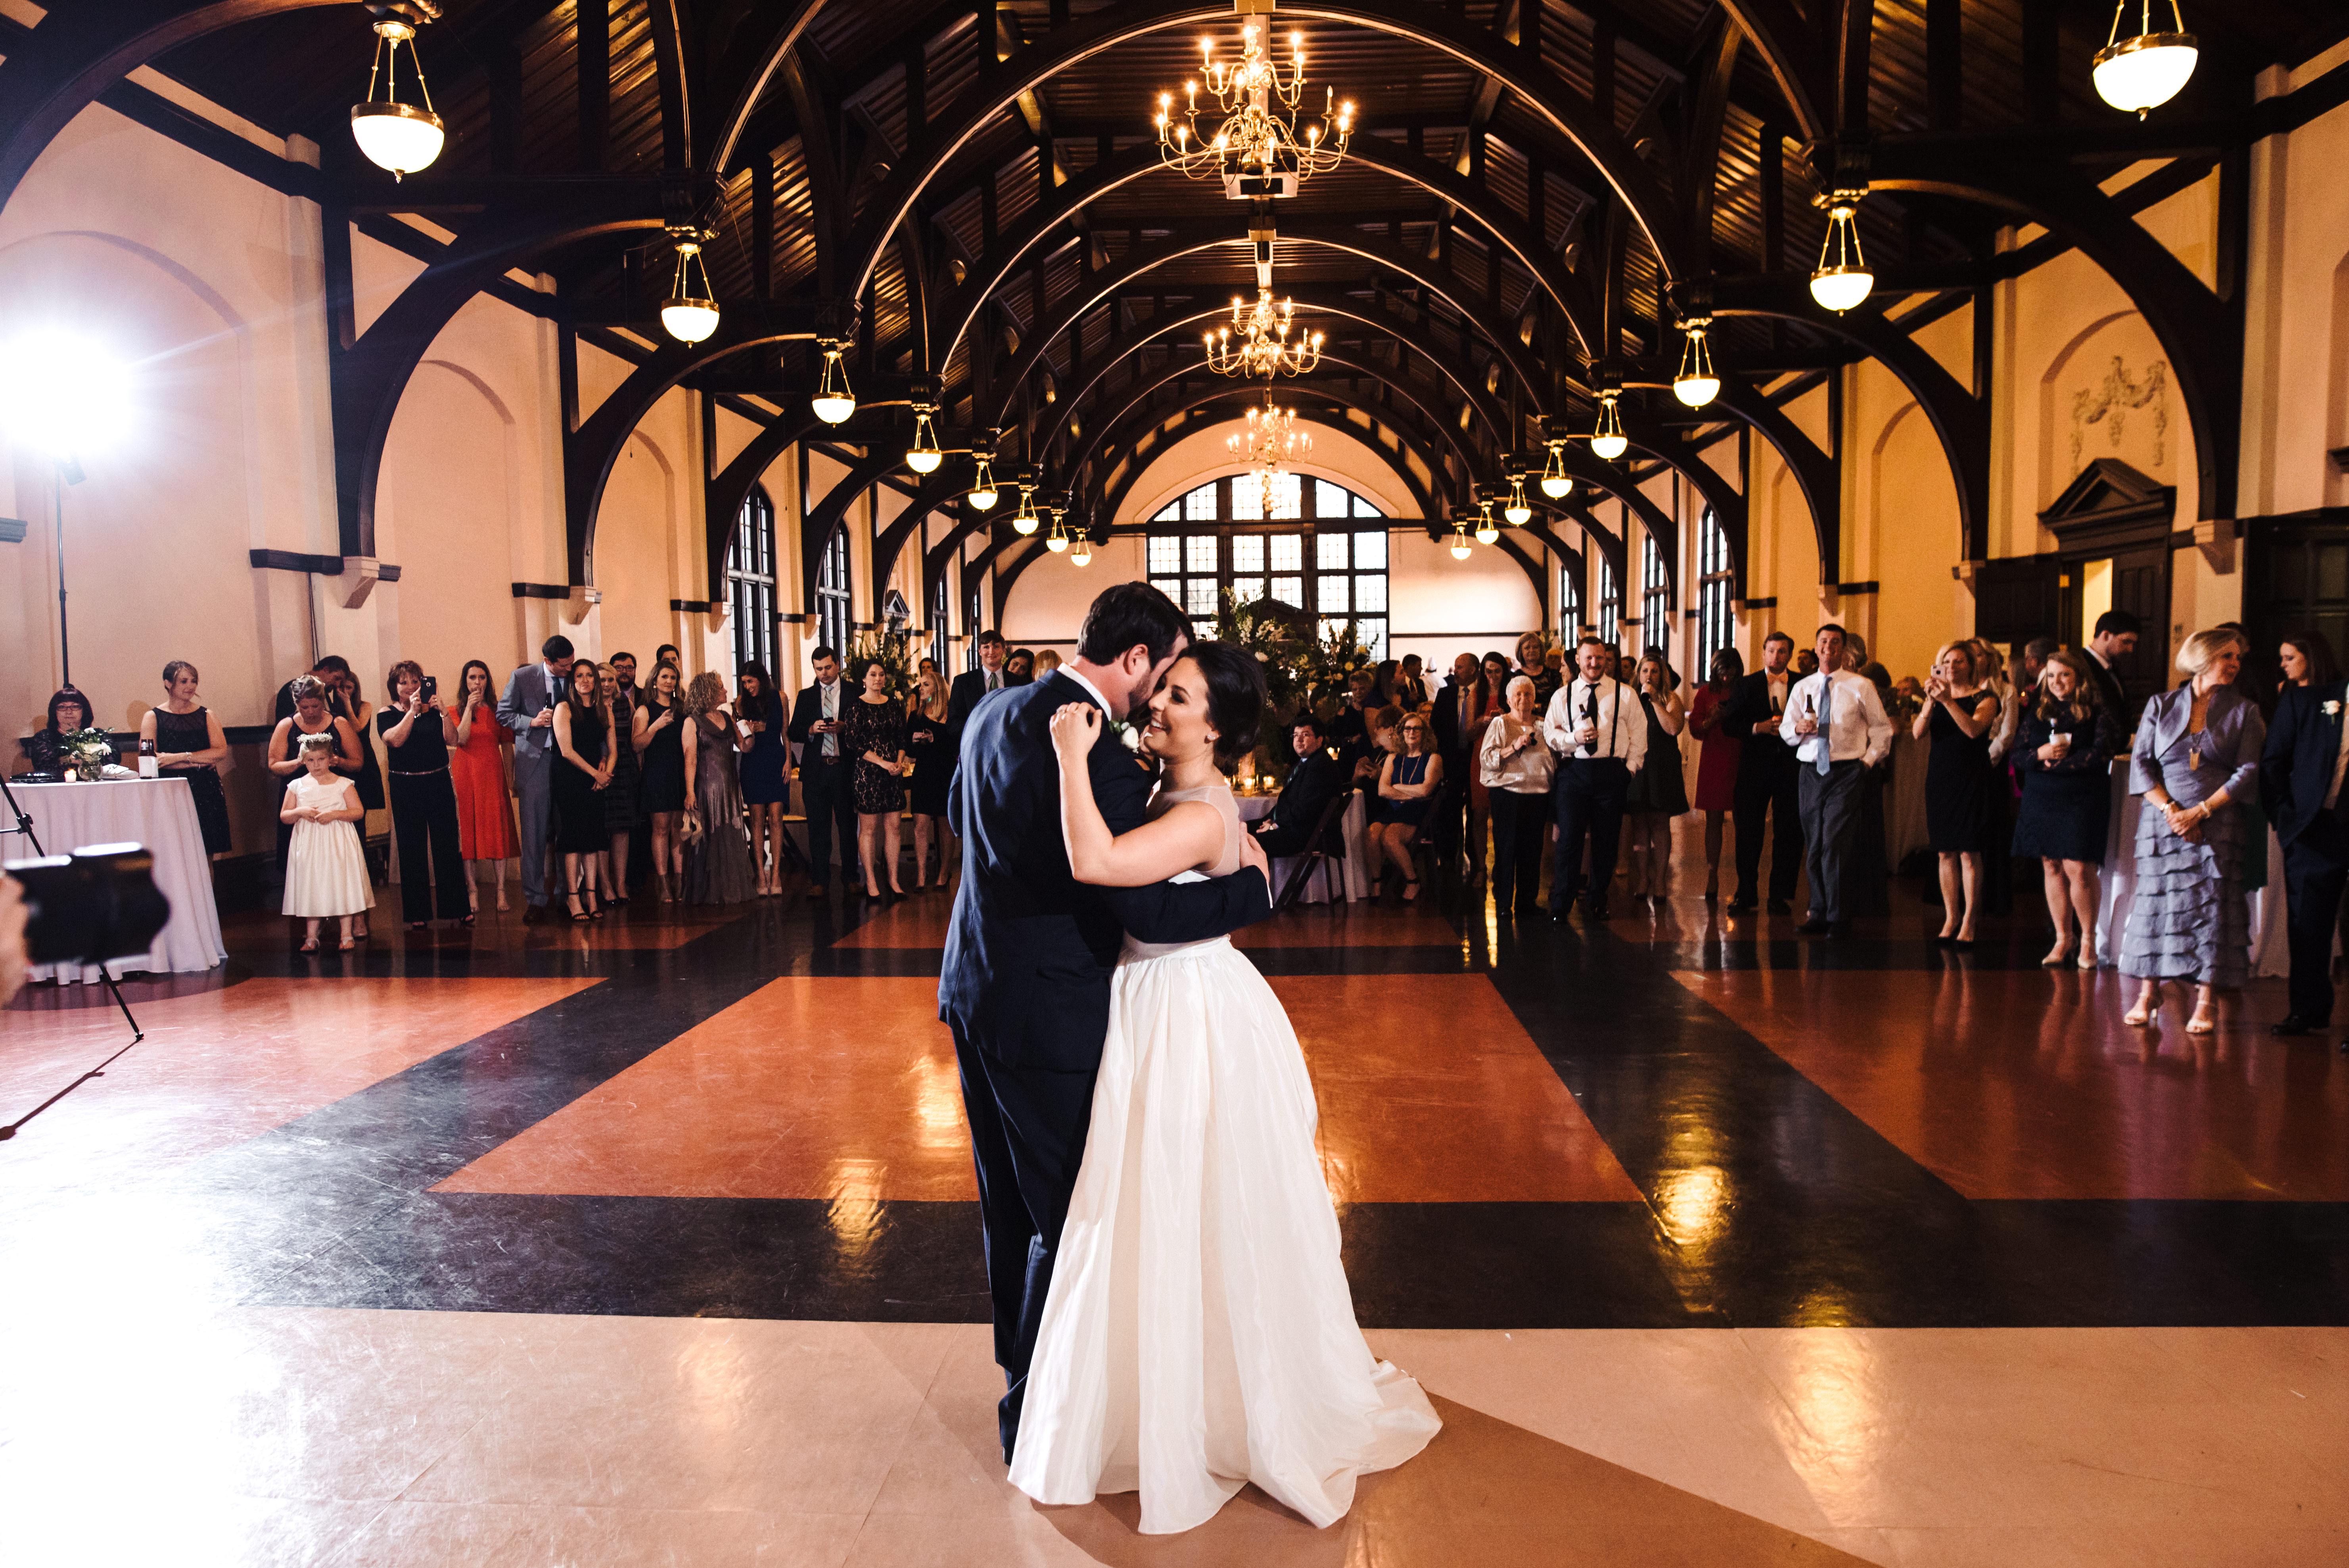 holding each other close during their first dance at mcbryde hall